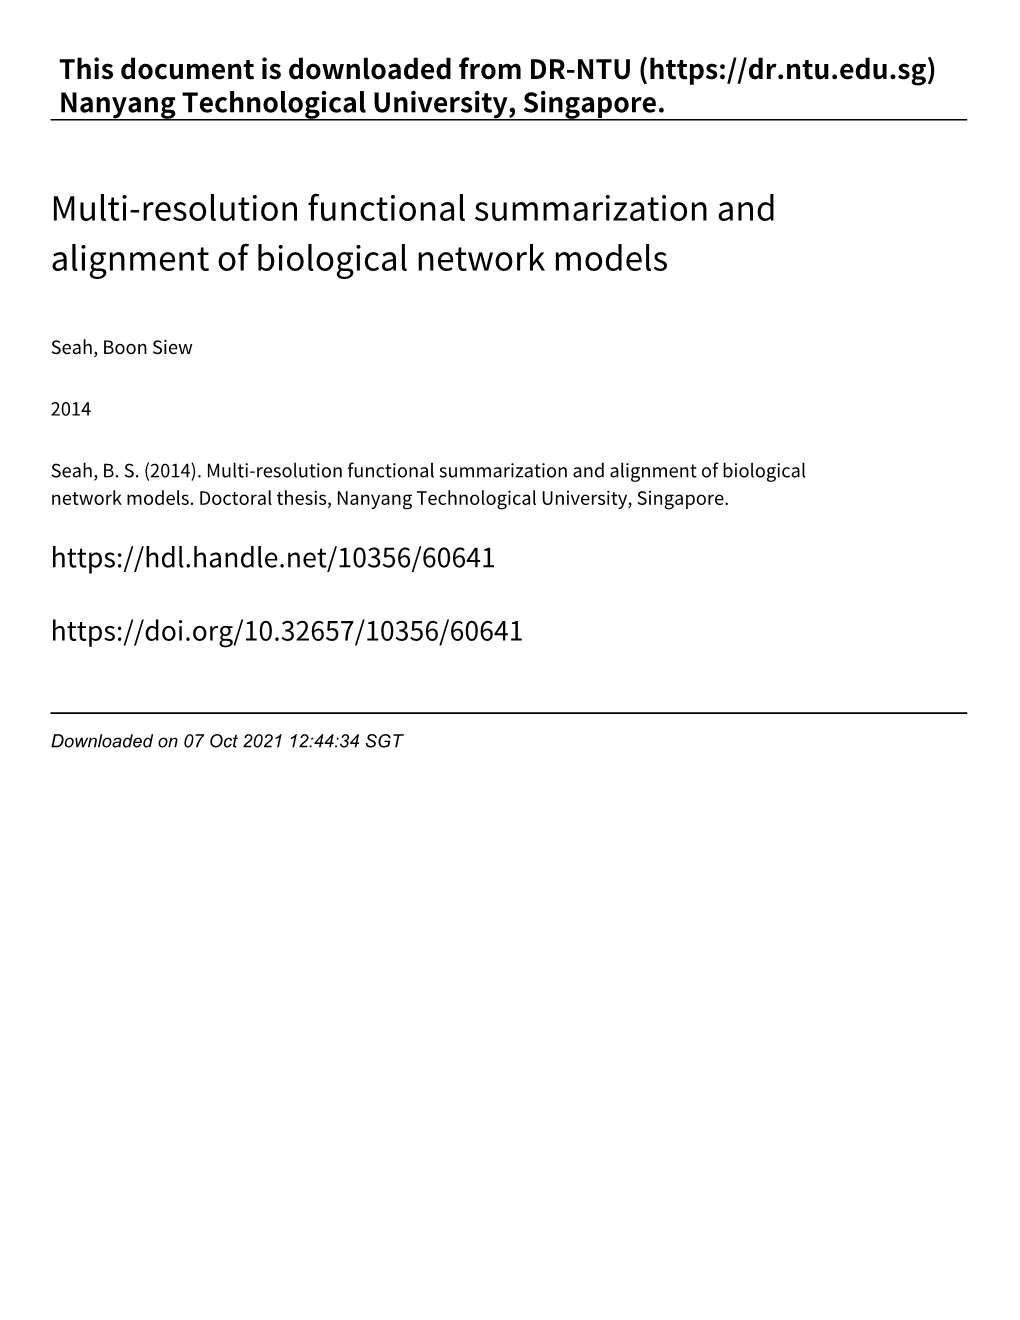 Multi‑Resolution Functional Summarization and Alignment of Biological Network Models